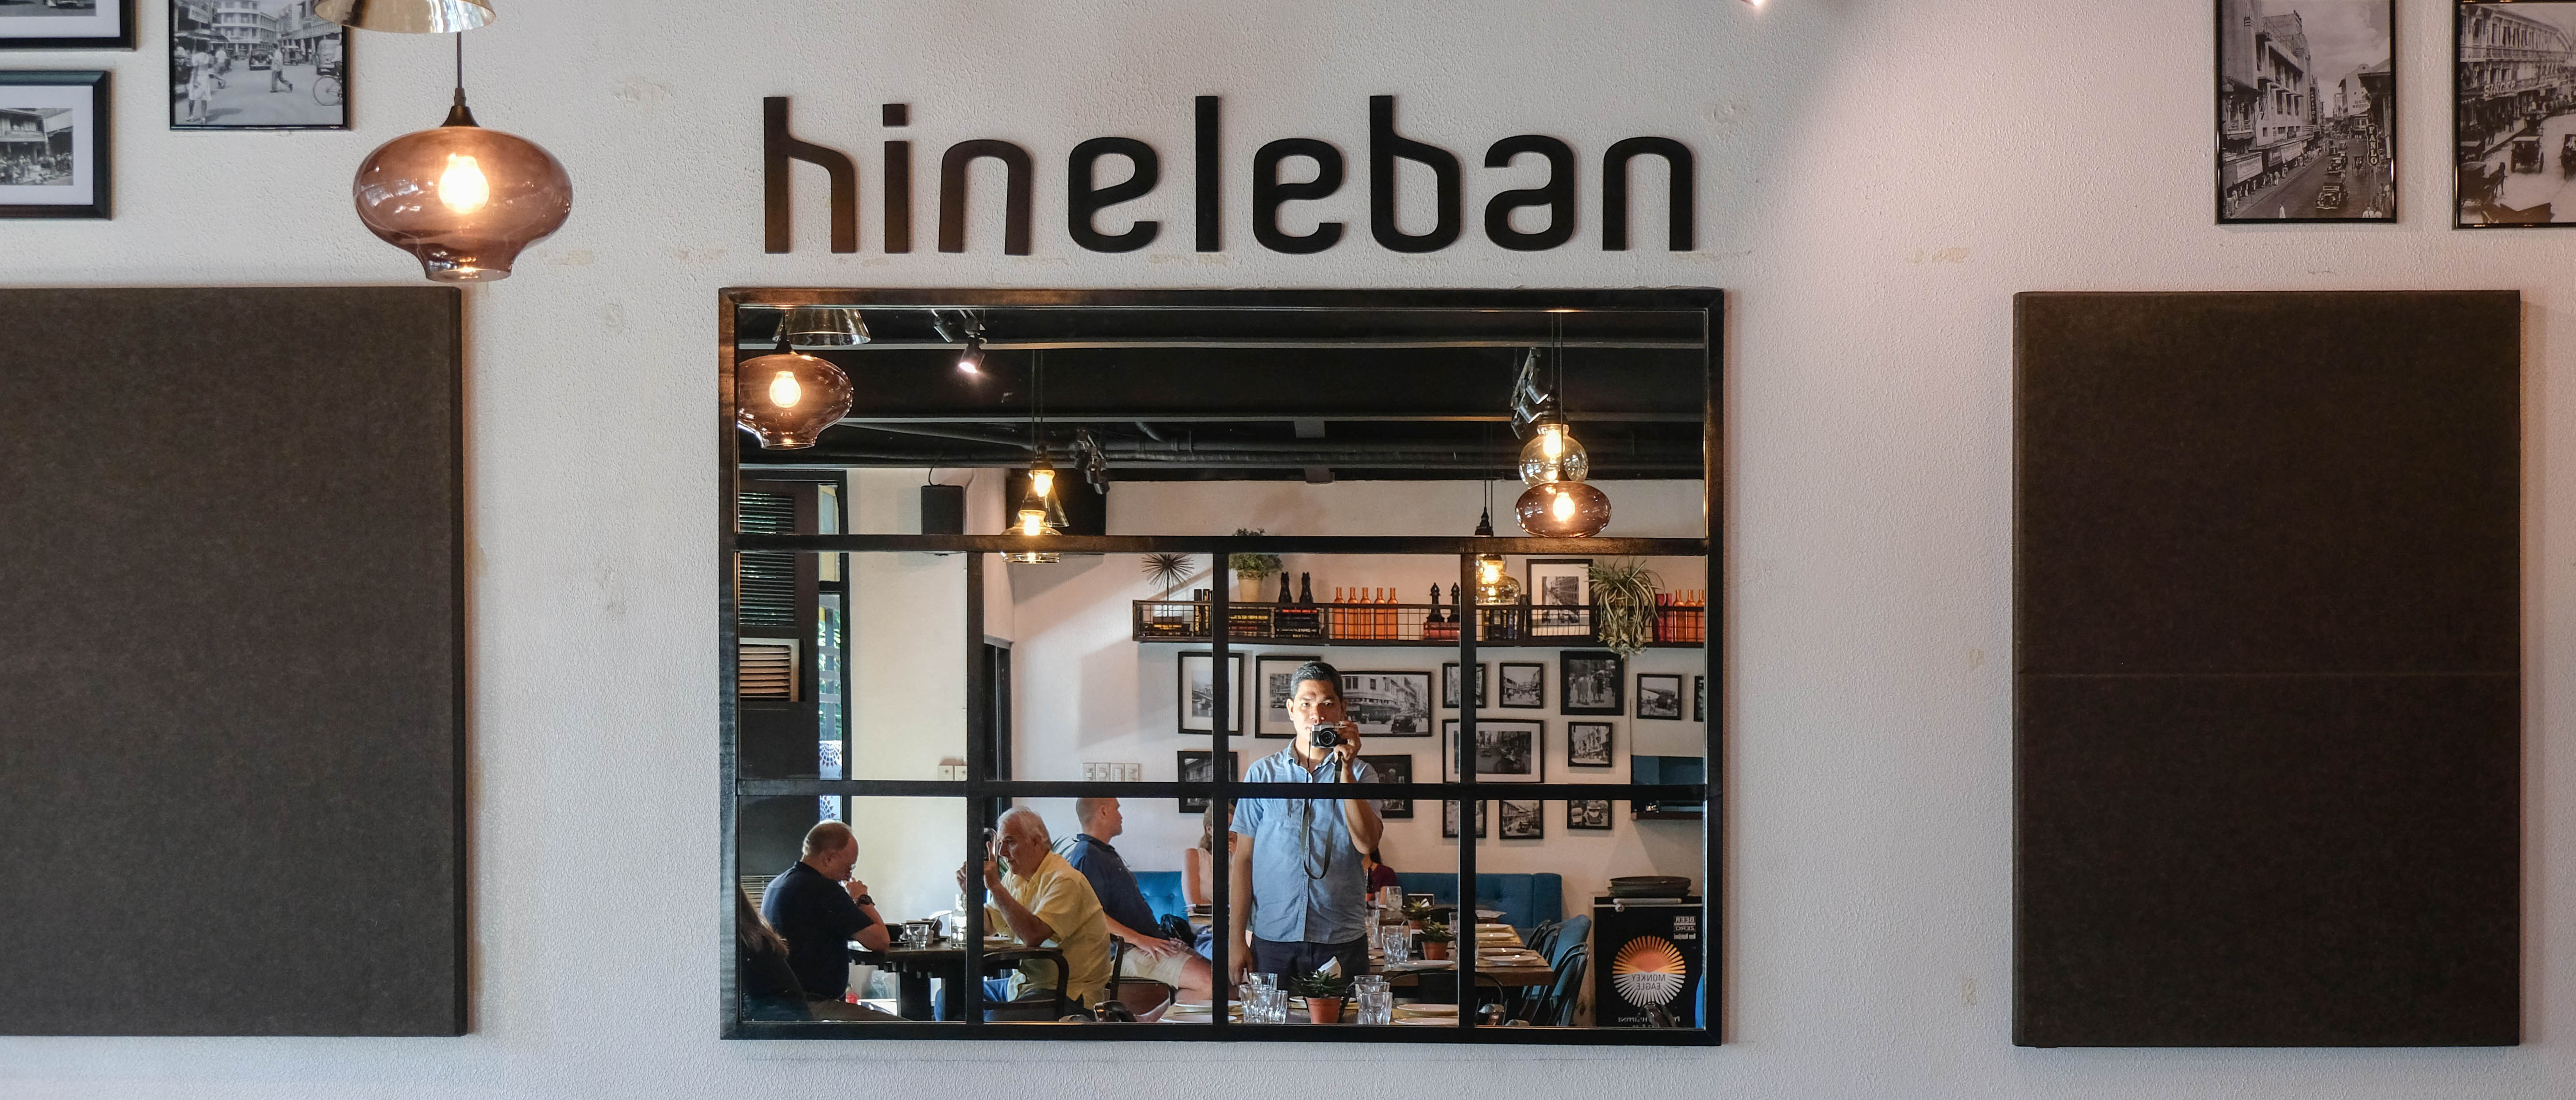 Backwell Partners with Hineleban For It’s New Menu